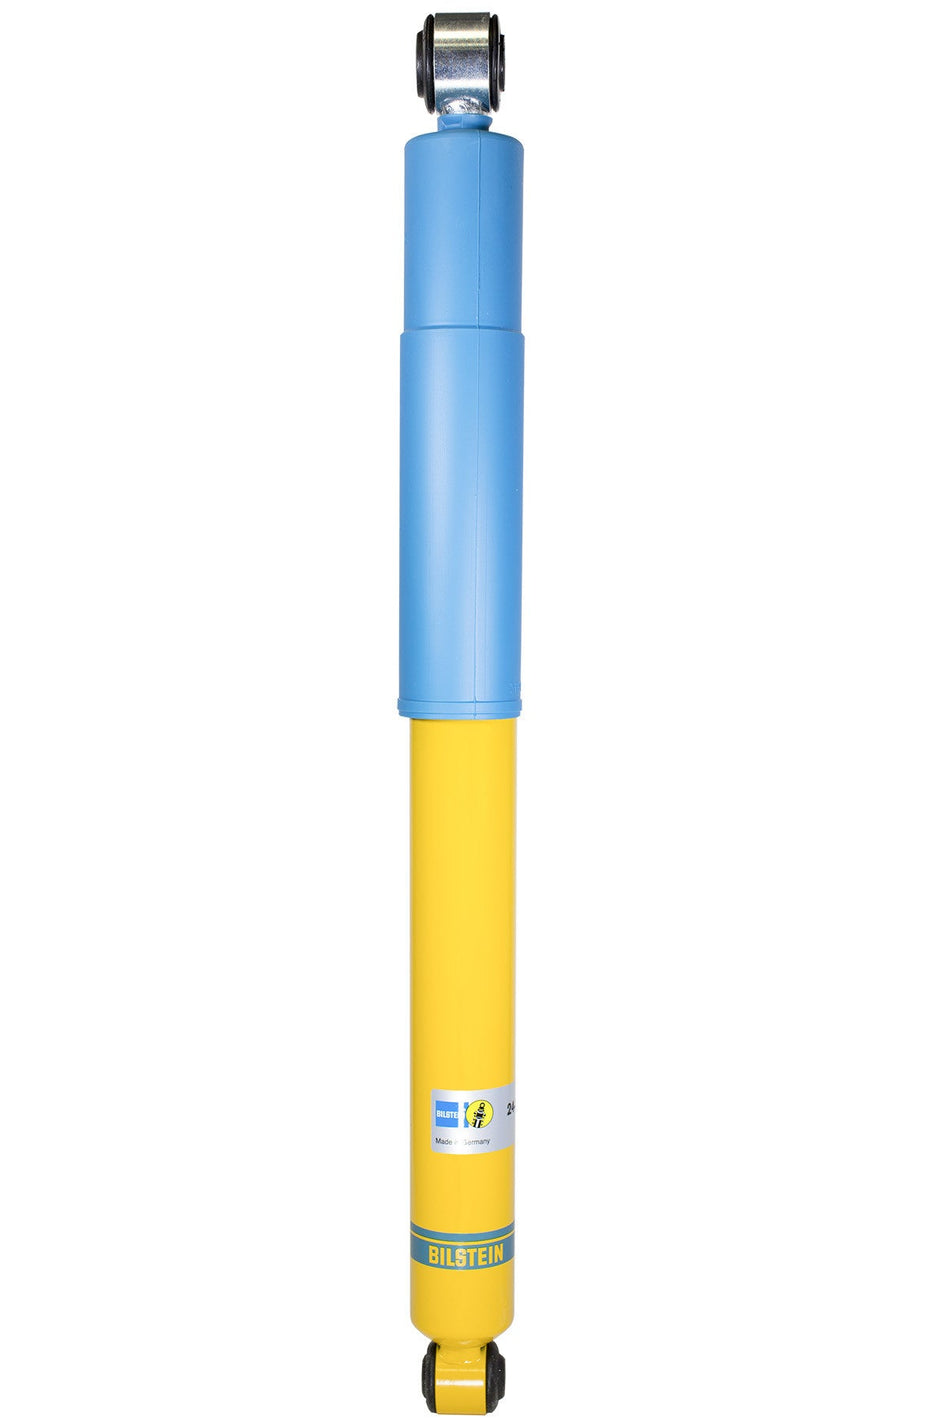 Bilstein Front B4 Shock for Land Rover 90/110 (1984-2001) / Discovery 1 (1989-1995) / Range Rover (1969-1994)